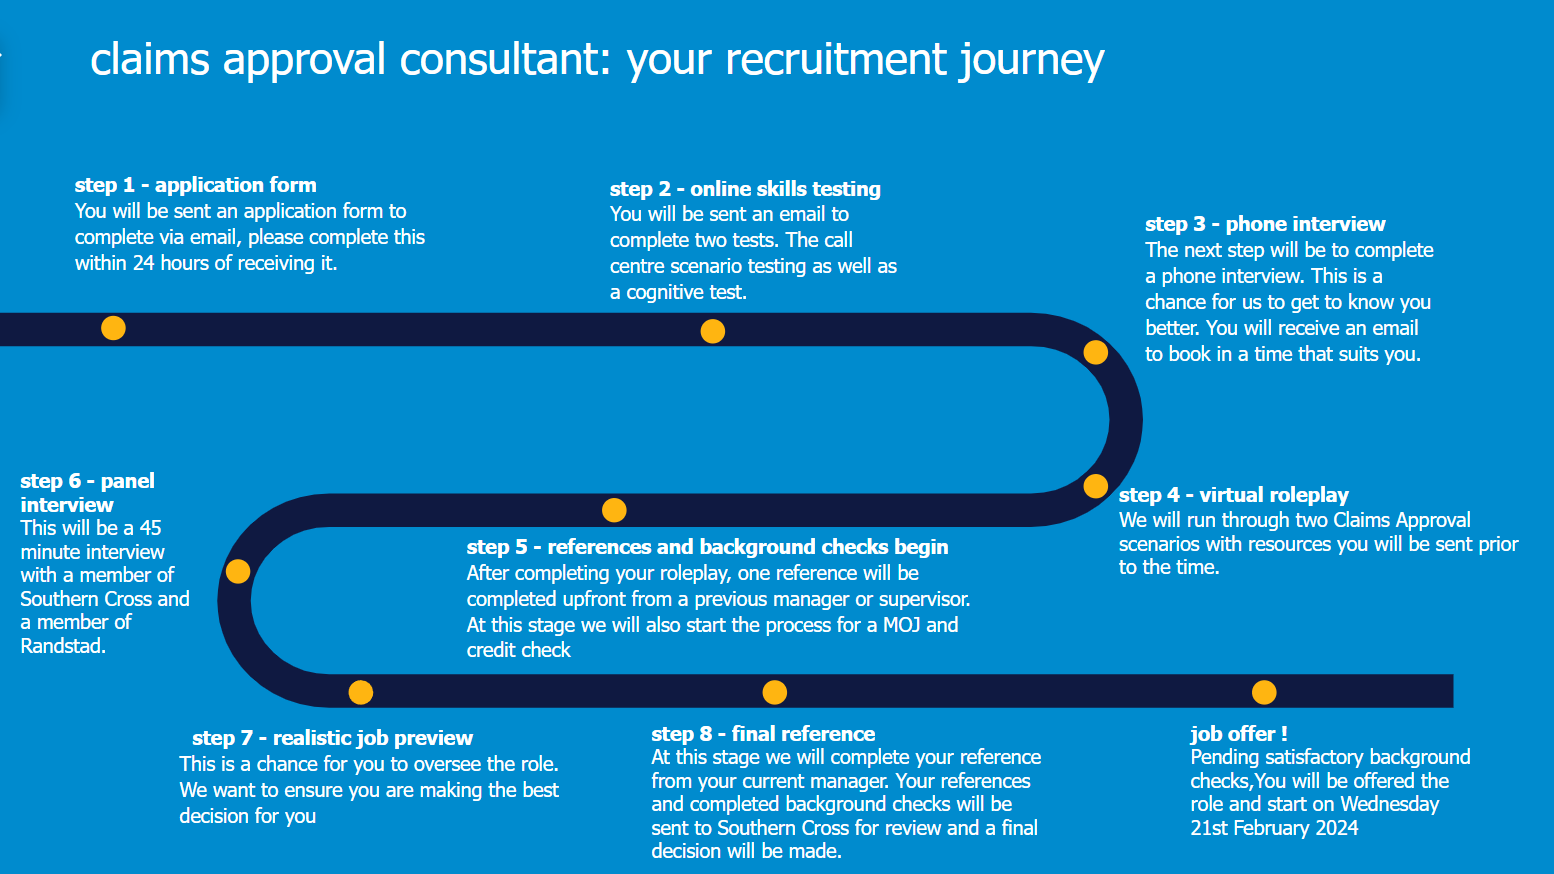 an infographic for the recruitment journey for claims approval consultant